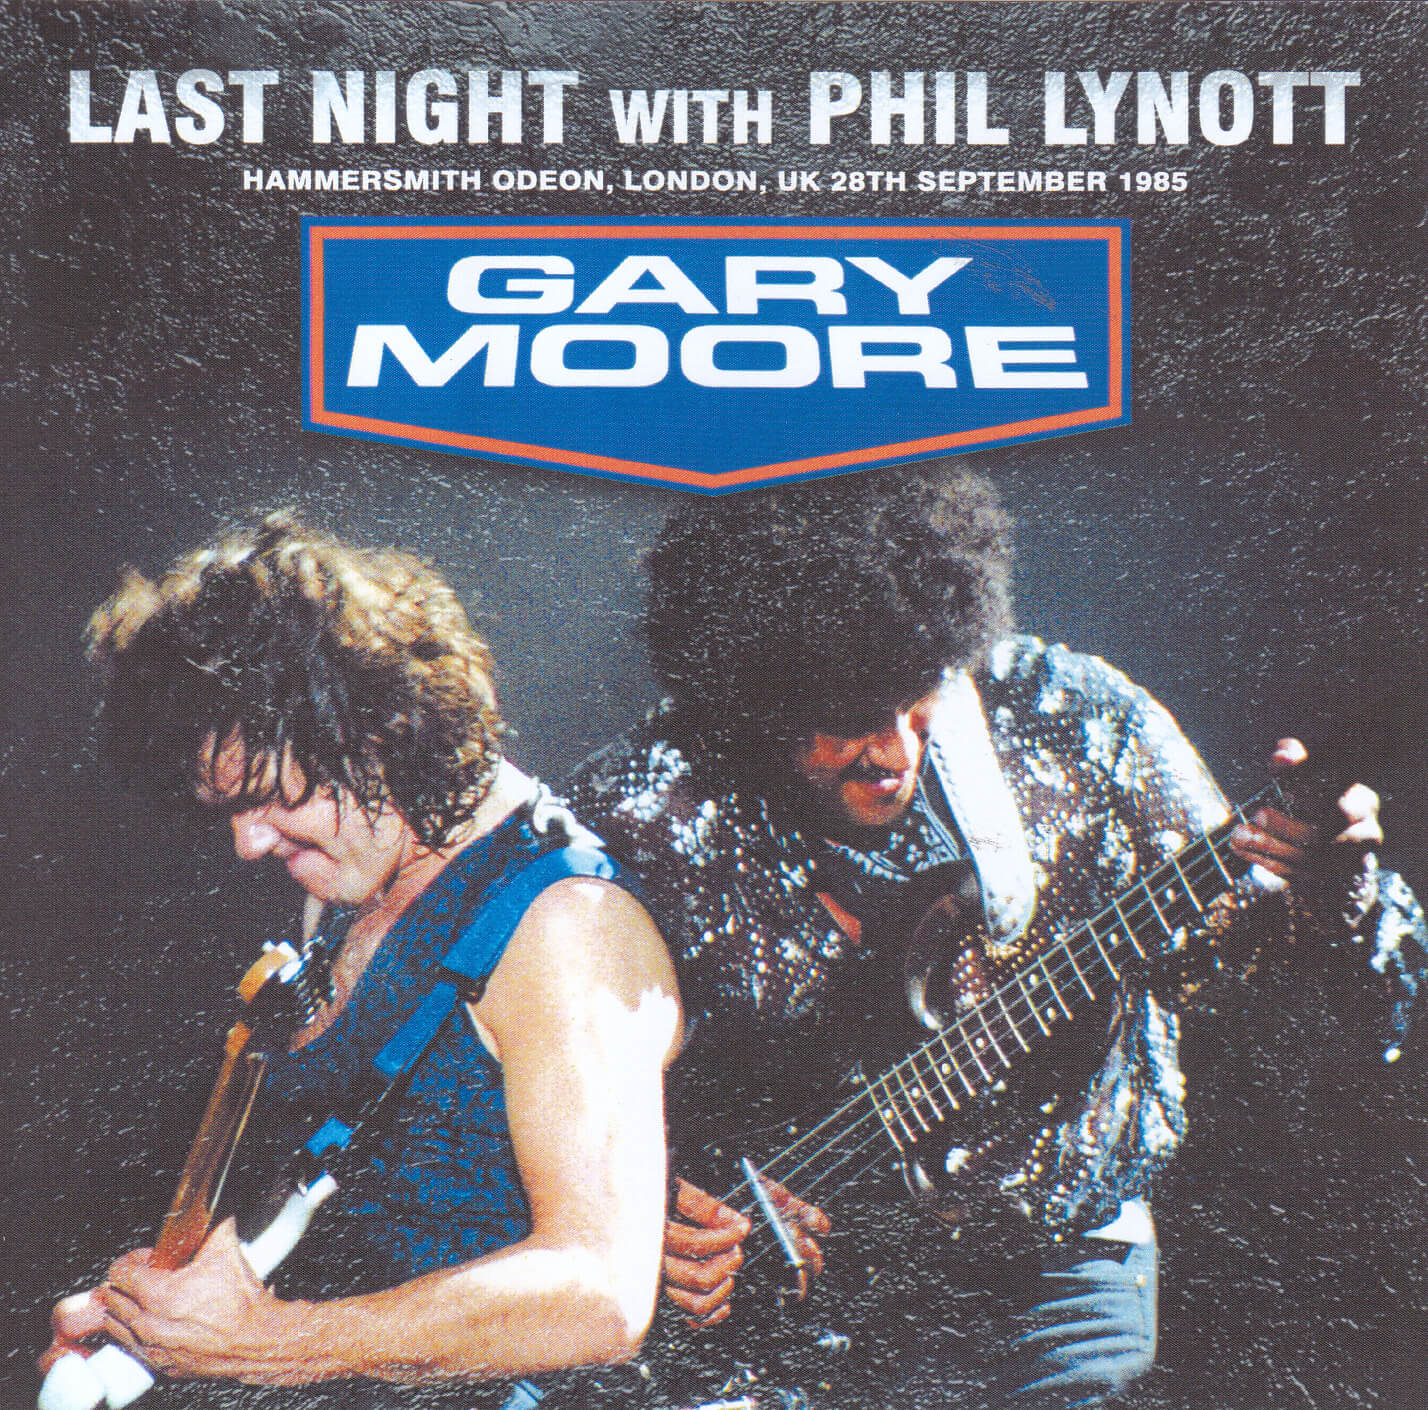 Gary Moore / Last Night With Phil Pynott / 2CDR – GiGinJapan